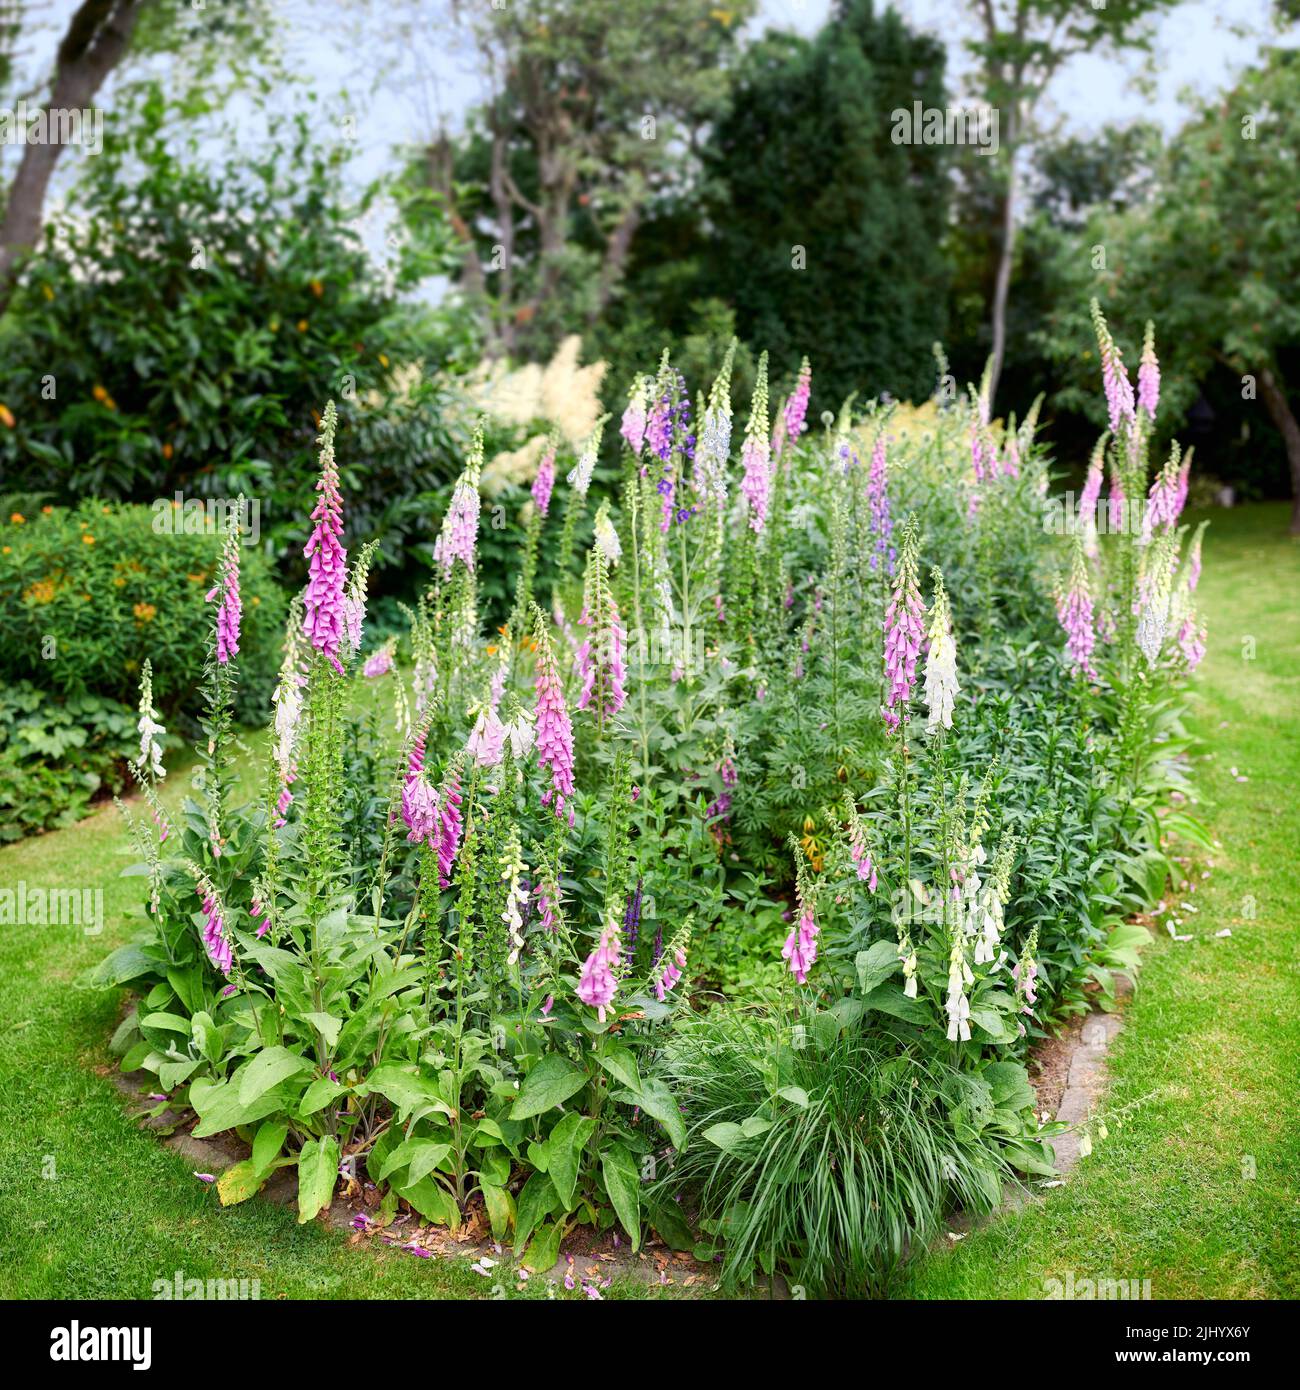 Foxglove flowers growing in a green park. Gardening perennial purple flowering plants grown as decoration in a neat garden or a well maintained Stock Photo